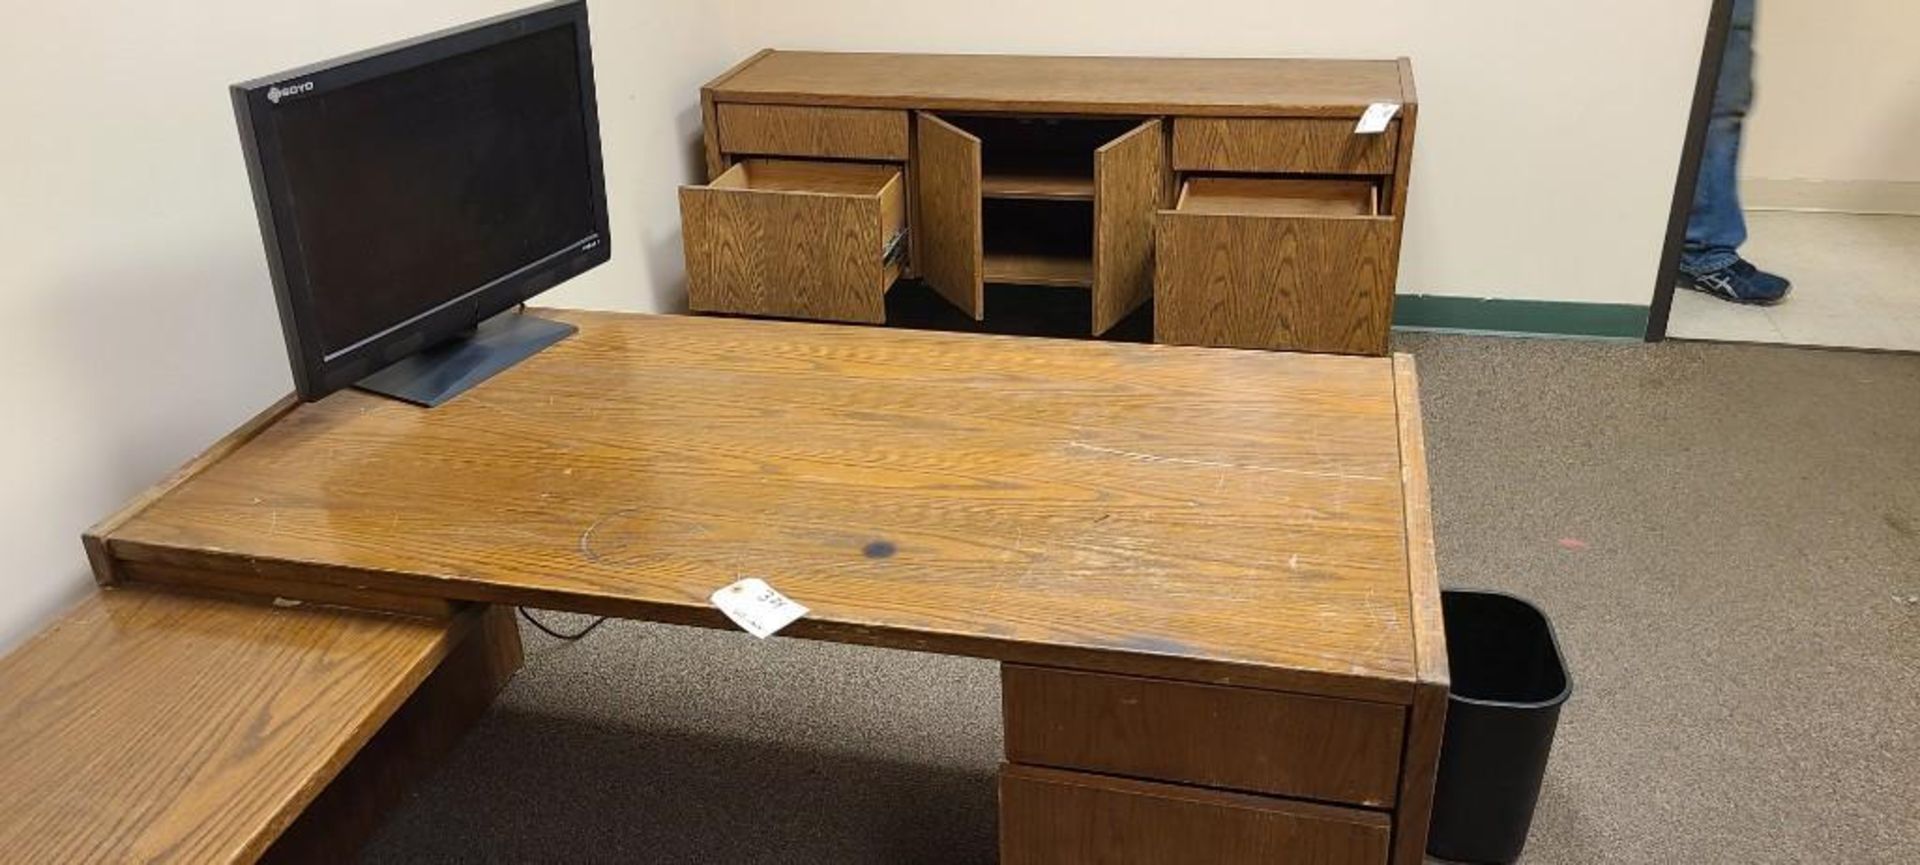 WOOD CORNER DESK 6'X5'X30", OFFICE TABLE WITH HANGING FILE DRAWERS, SOYO MONITOR - Image 3 of 3